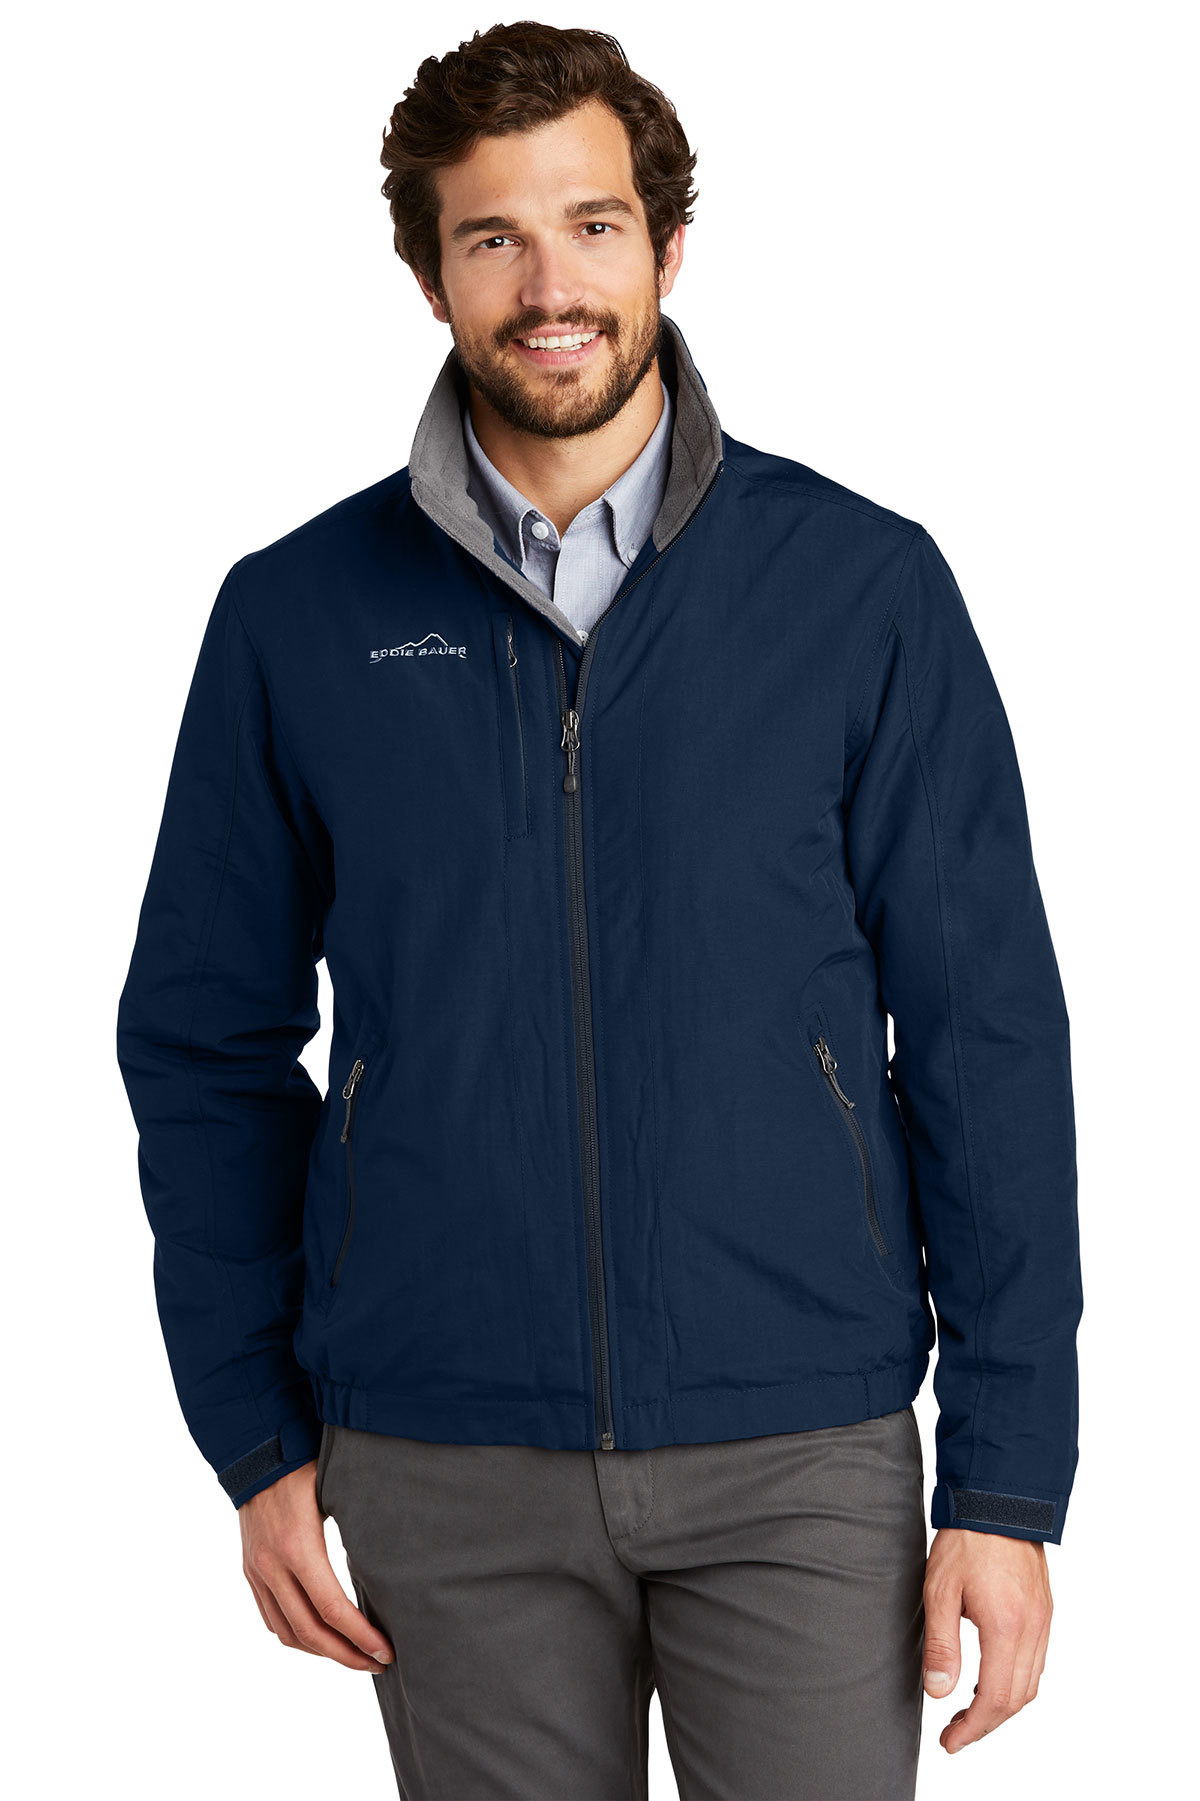 Eddie Bauer - Fleece-Lined Jacket | Product | Company Casuals